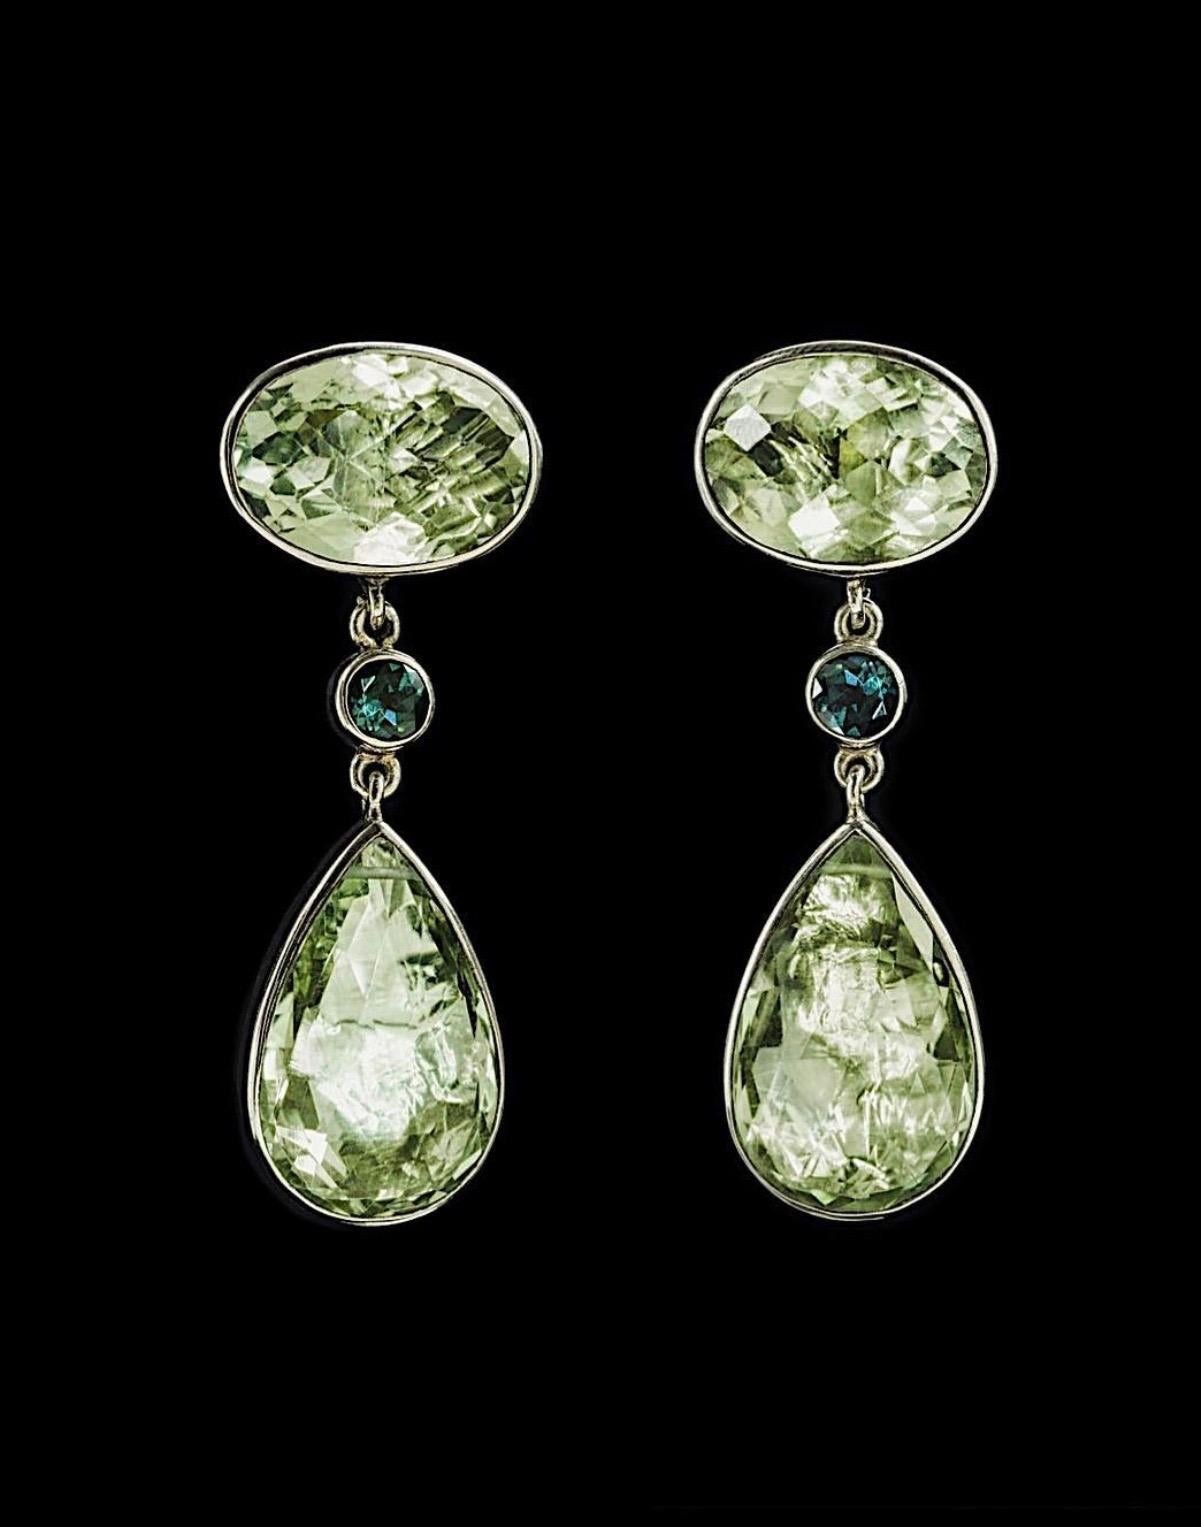 Jane Magon Collections Large Oval and Pear Shape light Green Tourmaline Earrings with a Two Bezel Set Green Quartz faceted Stones that dangle in Sterling Silver. Stamped 925 on the posts and JM on the tops. Measuring Two inches in length and weigh